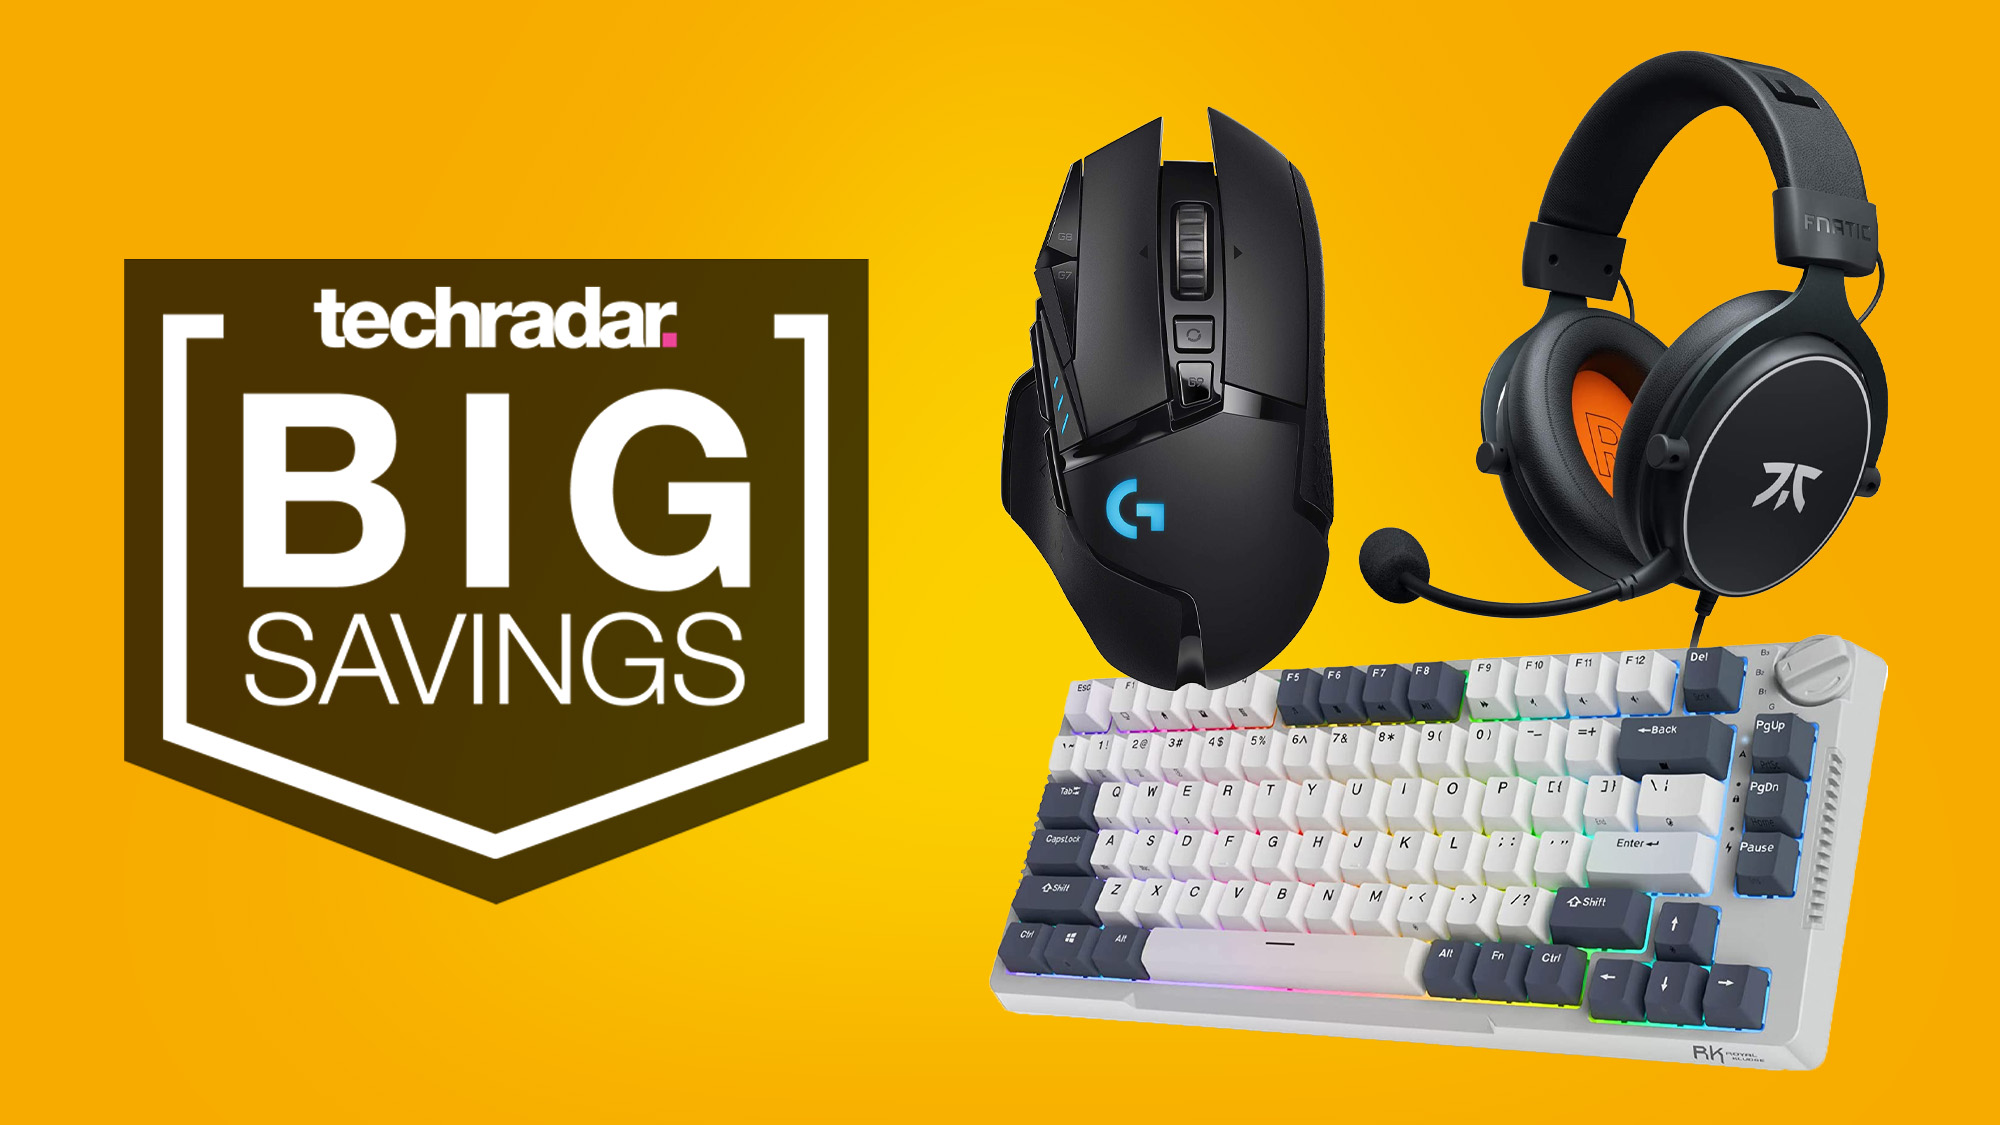 Logitech gaming accessories are on sale for up to 70% off on